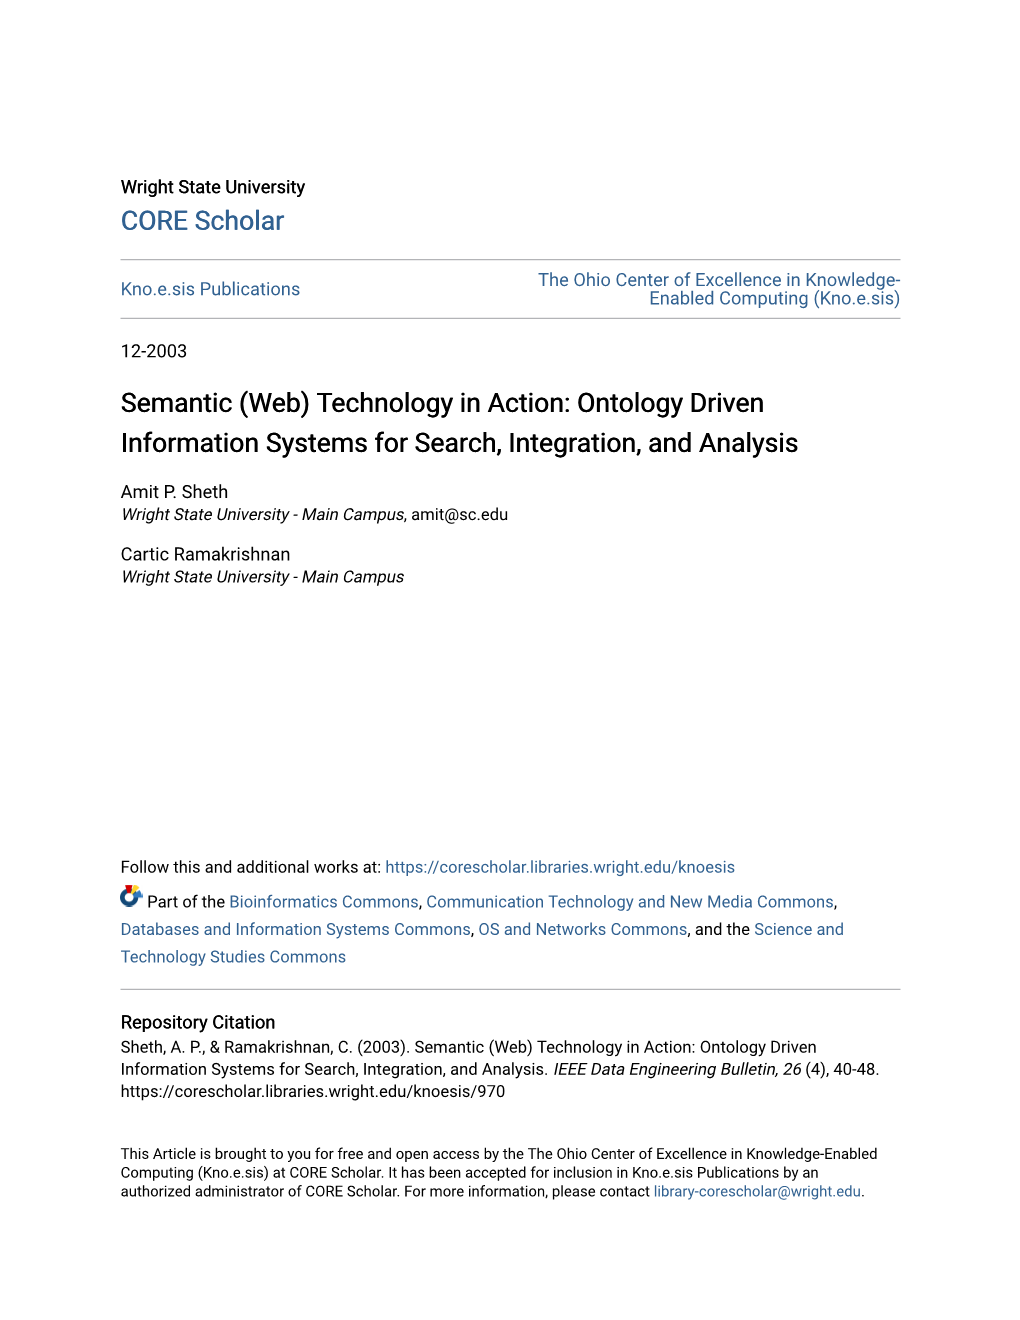 Semantic (Web) Technology in Action: Ontology Driven Information Systems for Search, Integration, and Analysis